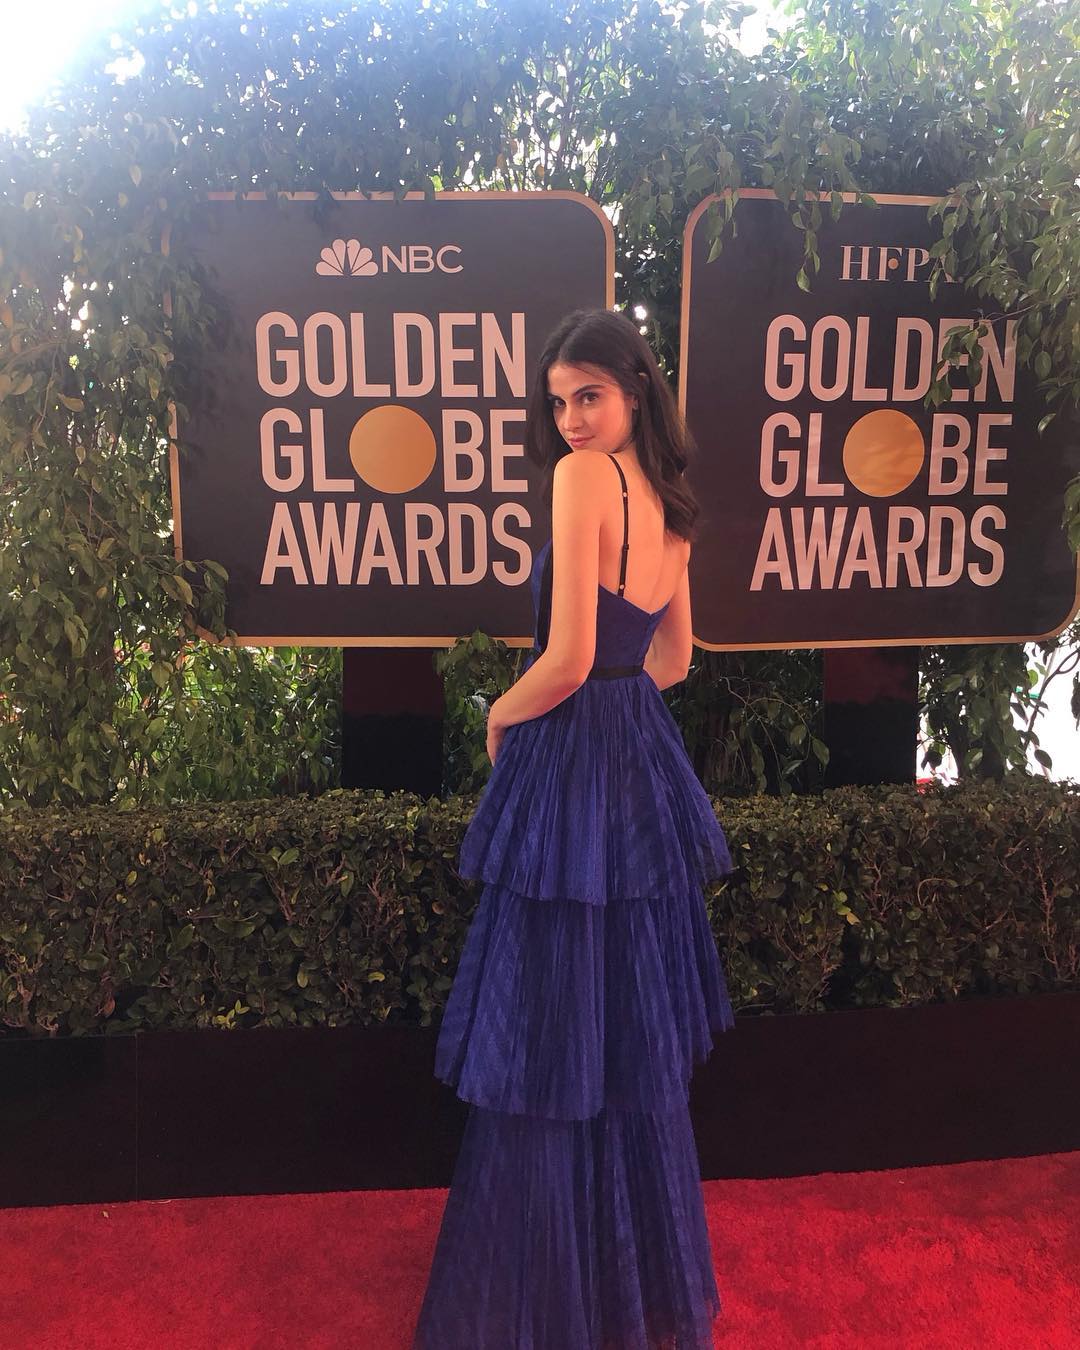 Introducing Kelleth Cuthbert, 'The Fiji Water Girl' Who Is The Accidental Viral Star Of The Golden Globes